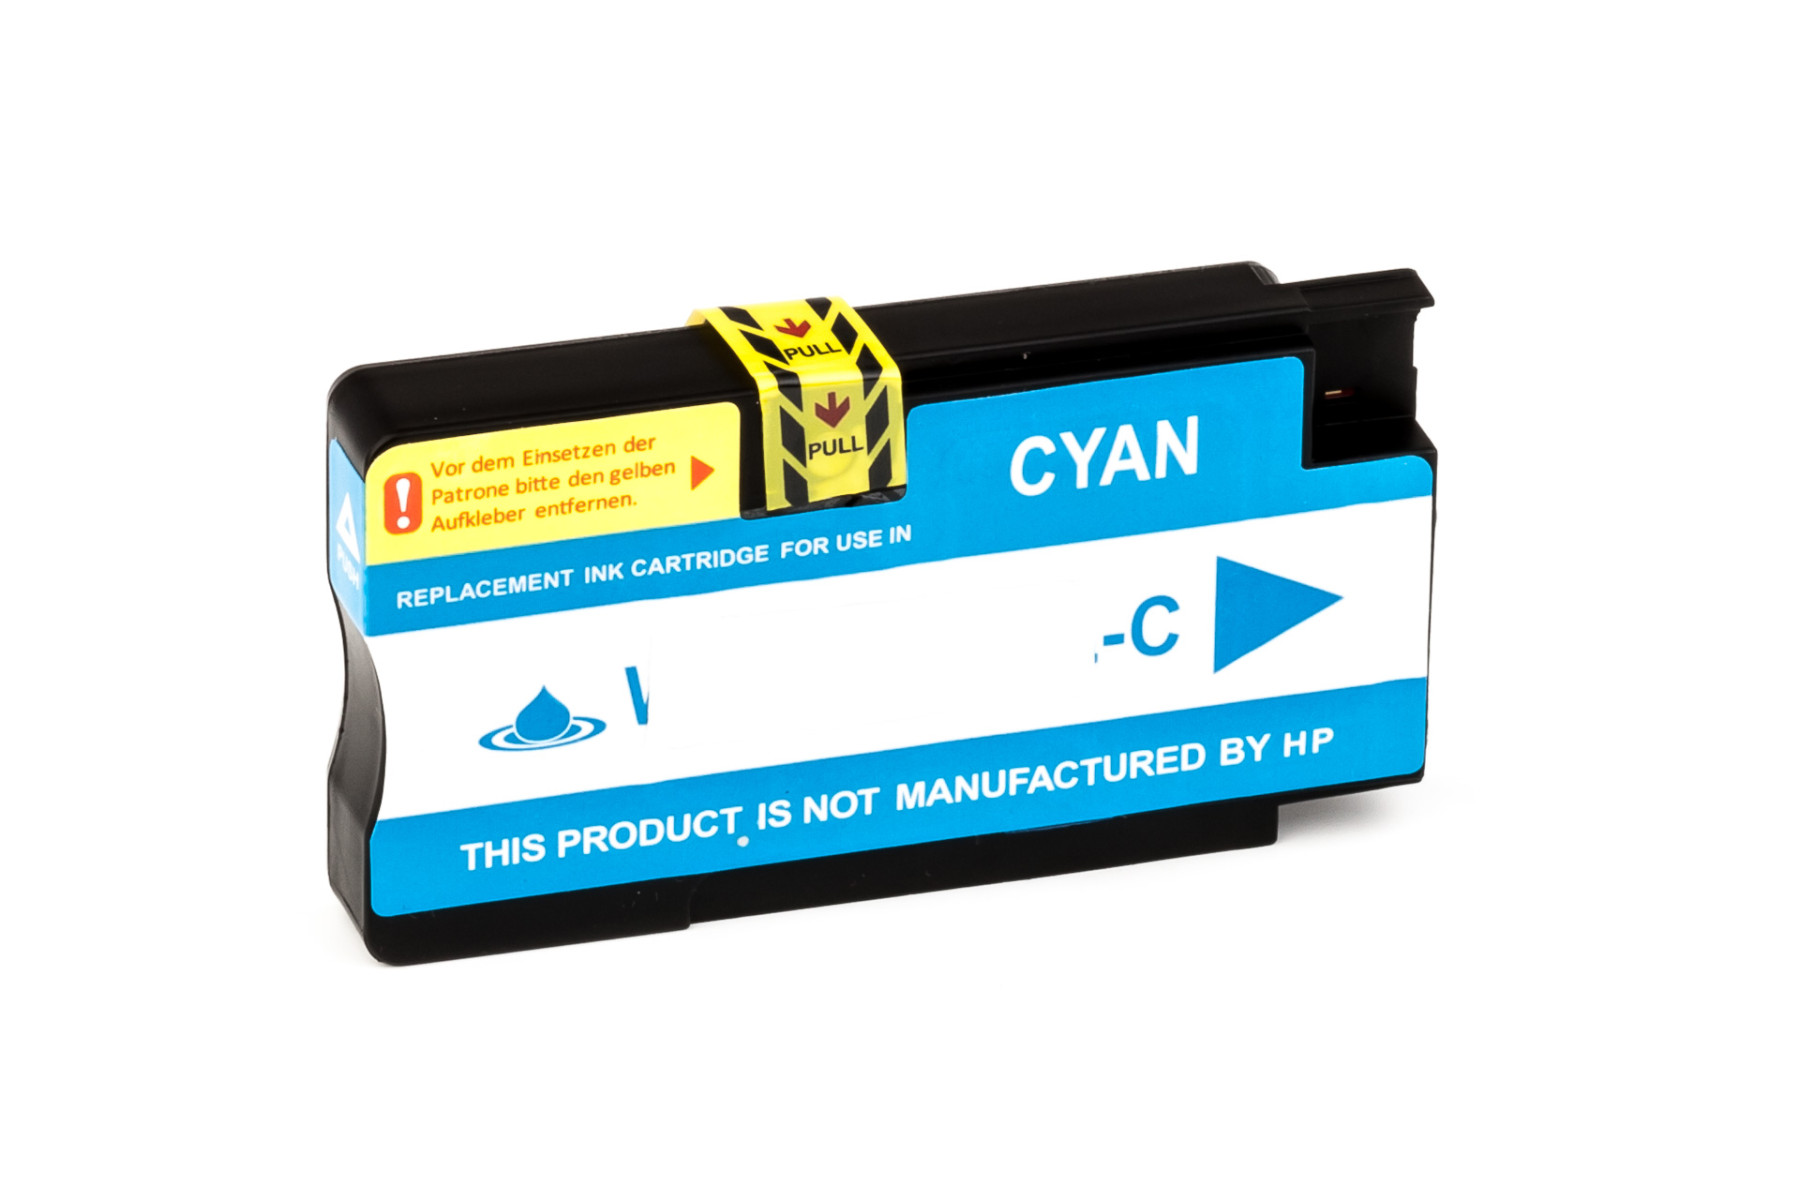 Set consisting of Ink cartridge (alternative) compatible with HP - CN046AE/CN 046 AE - 951XL - Officejet PRO 8100 Eprinter cyan, CN047AE/CN 047 AE - 951XL - Officejet PRO 8100 Eprinter magenta, CN048AE/CN 048 AE - 951XL - Officejet PRO 8100 Eprinter yello